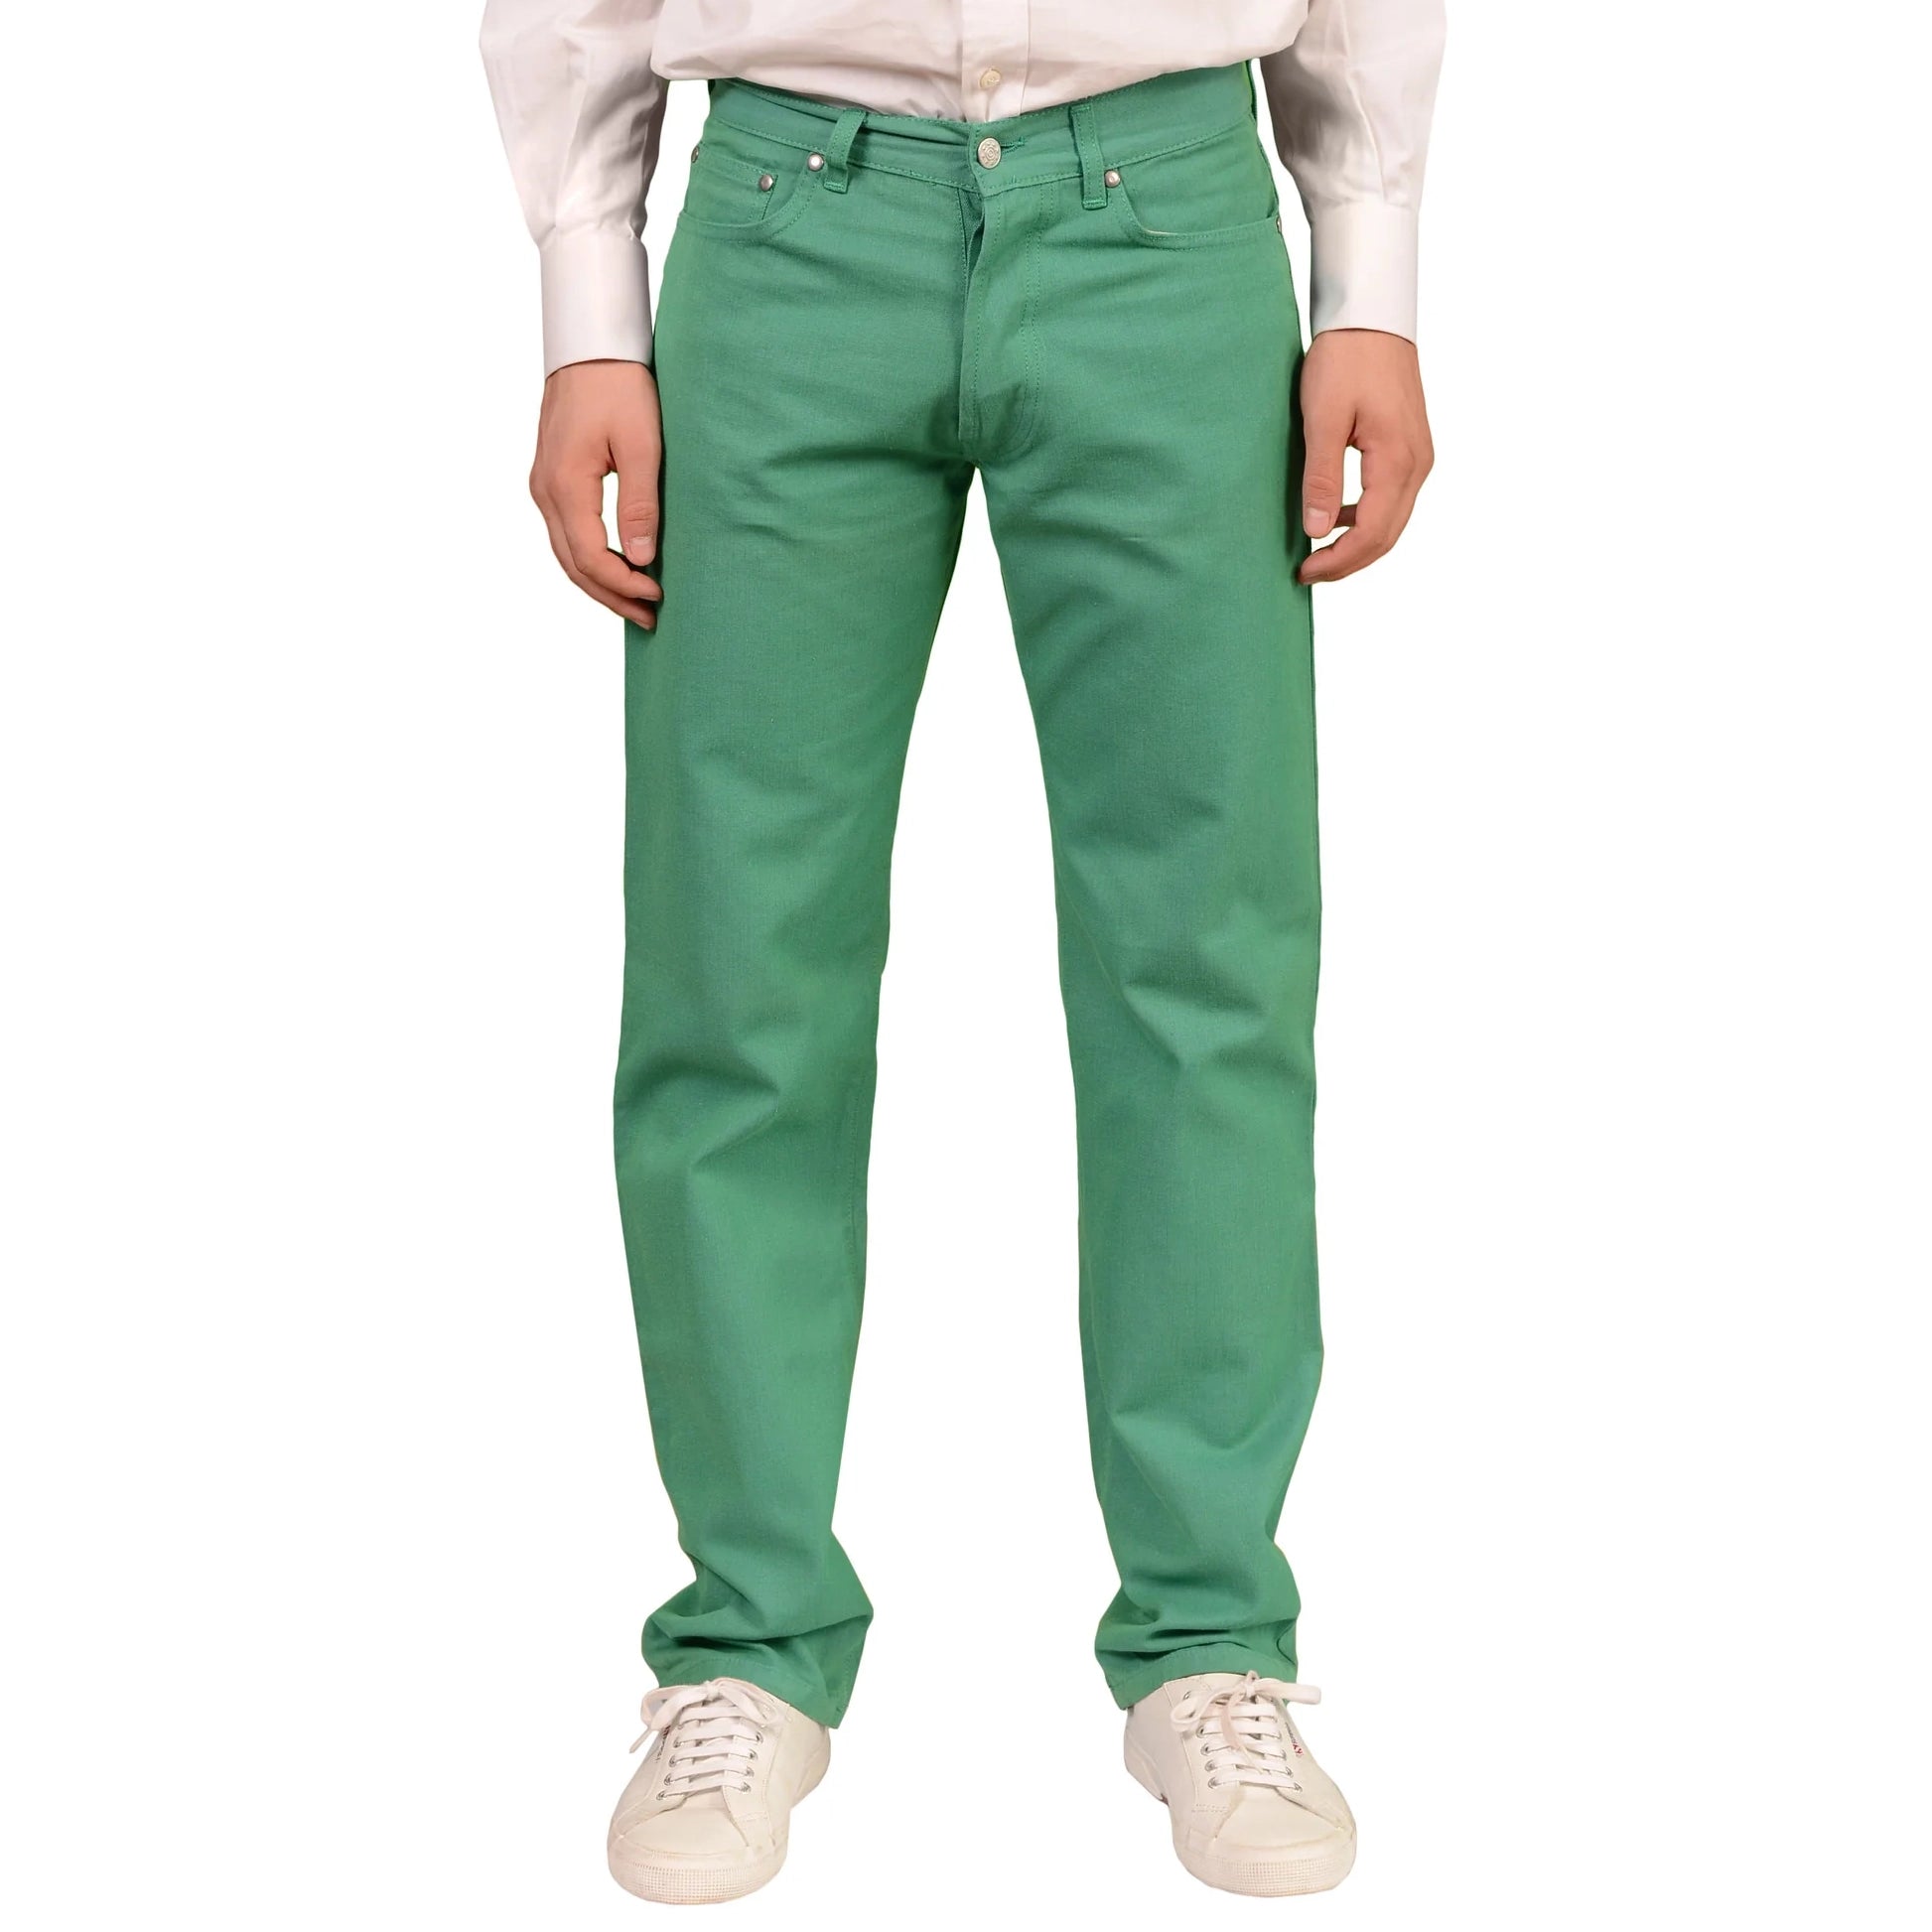 RUBINACCI Napoli Solid Green Cotton Jeans Pants NEW US 38 Straight Fit